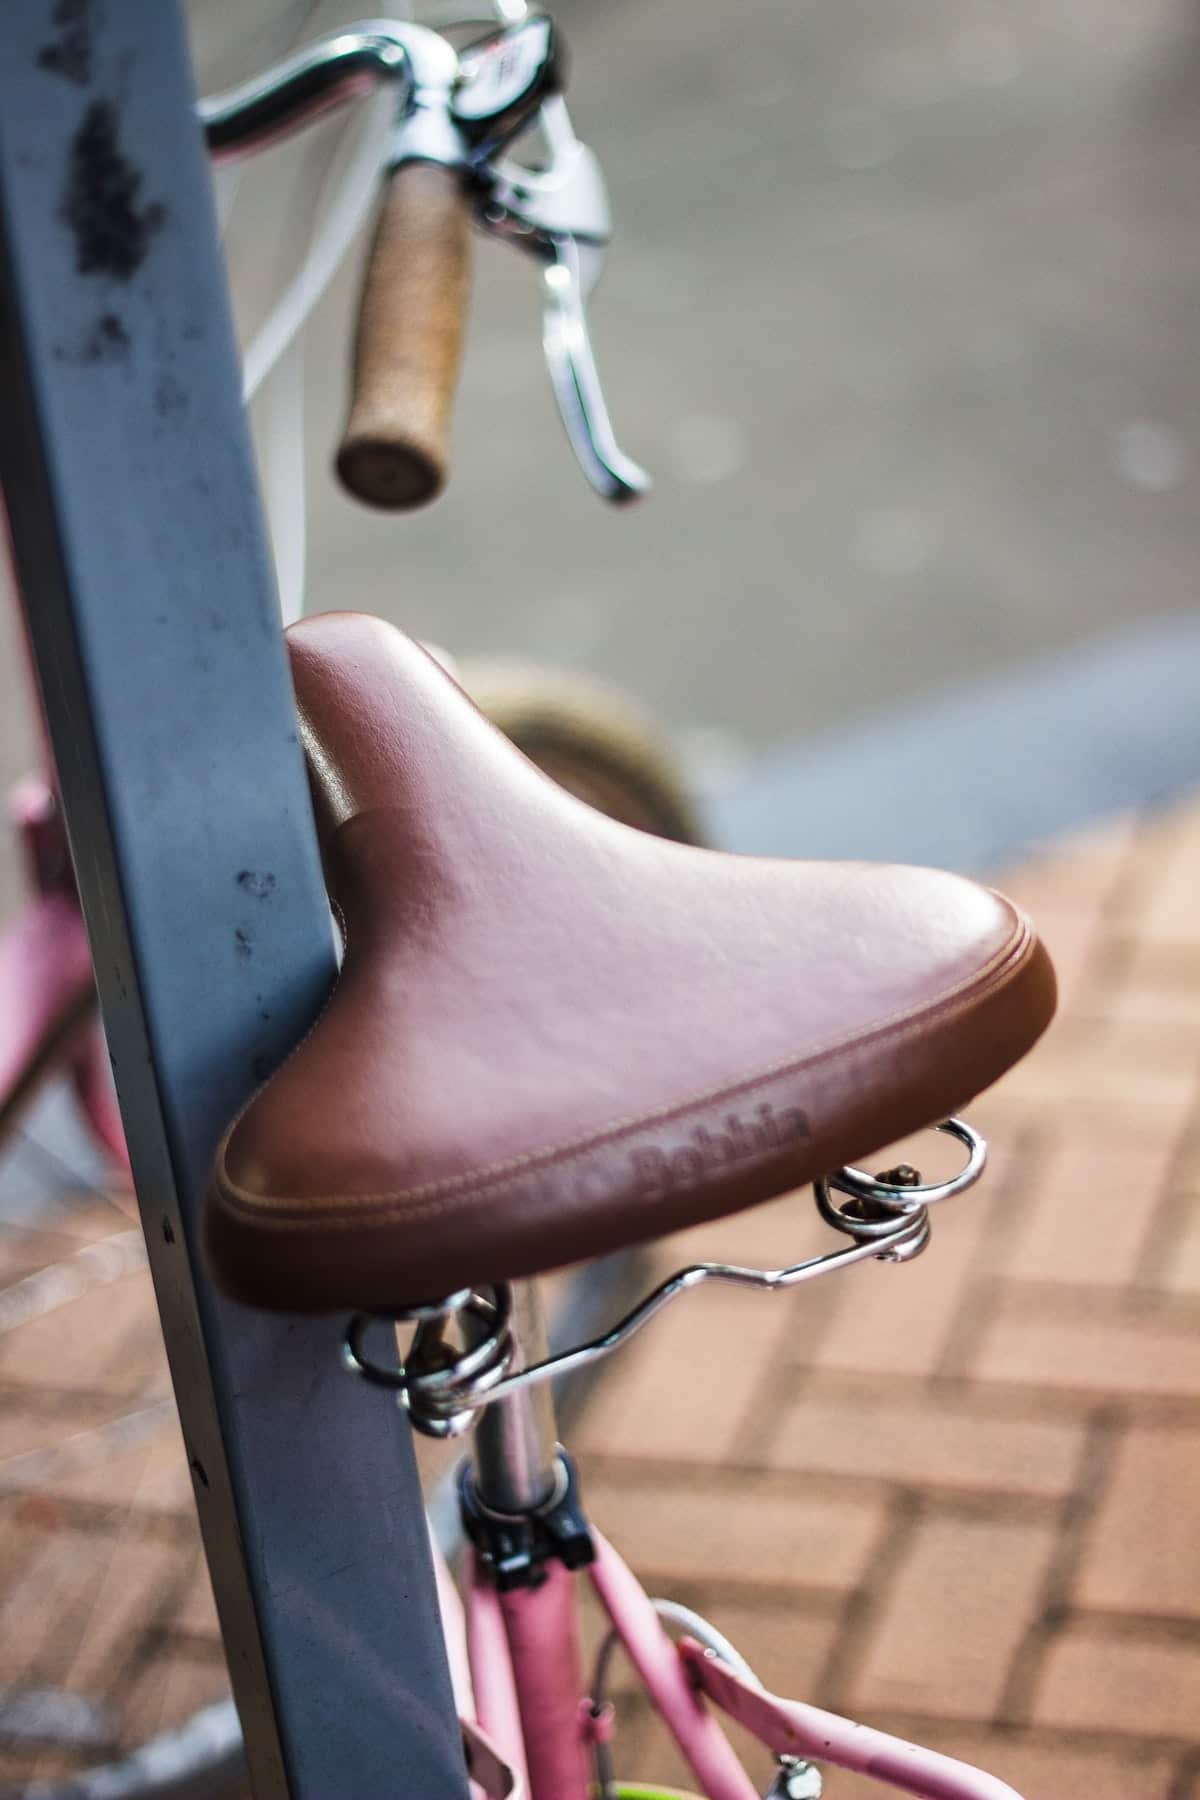 A brown cycle saddle.